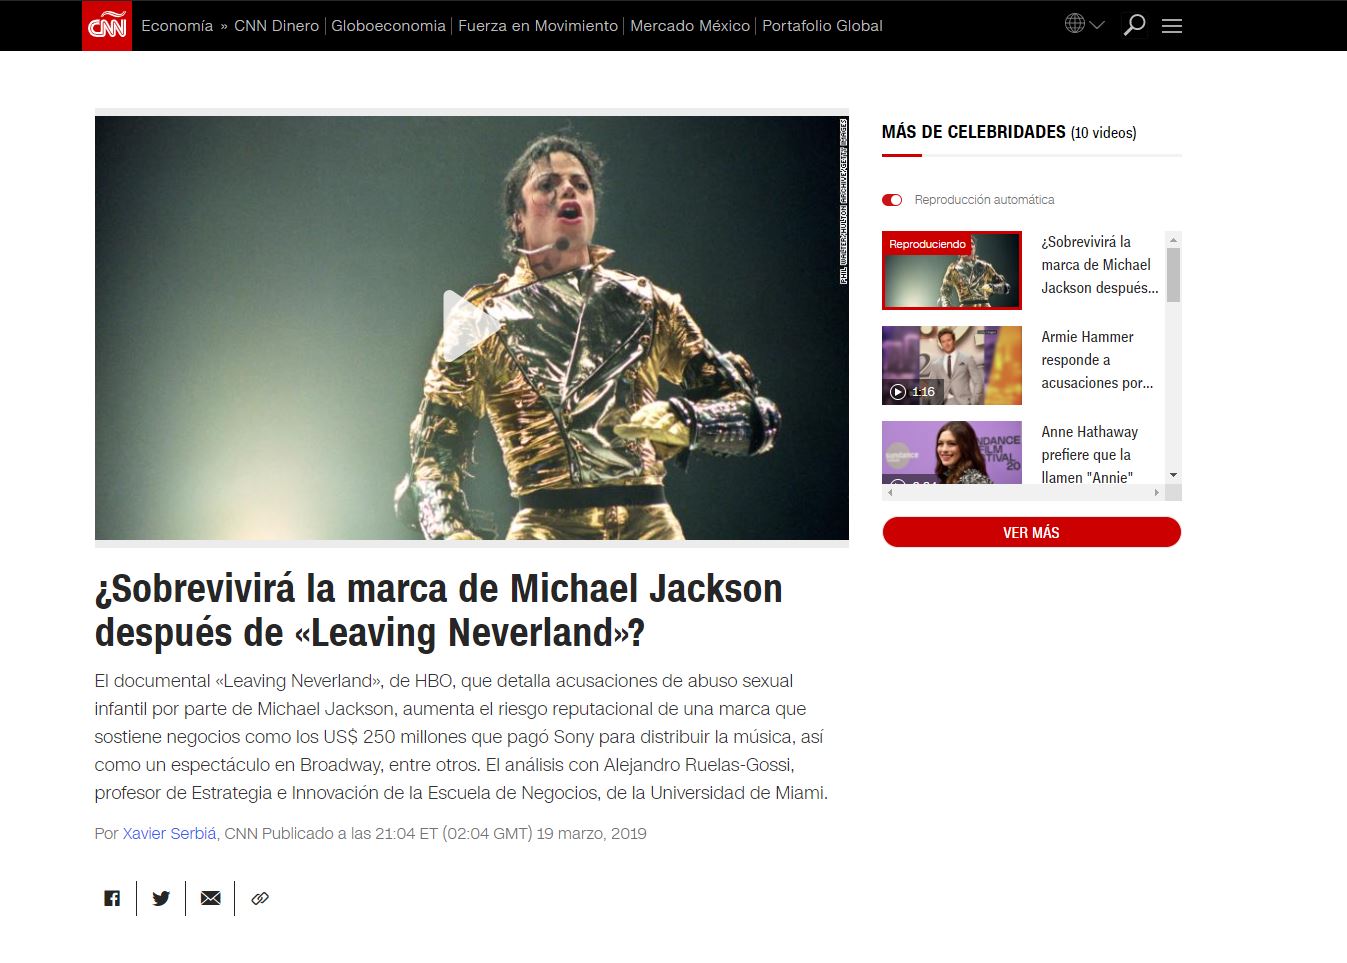 Will the Michael Jackson brand survive after «Leaving Neverland»?